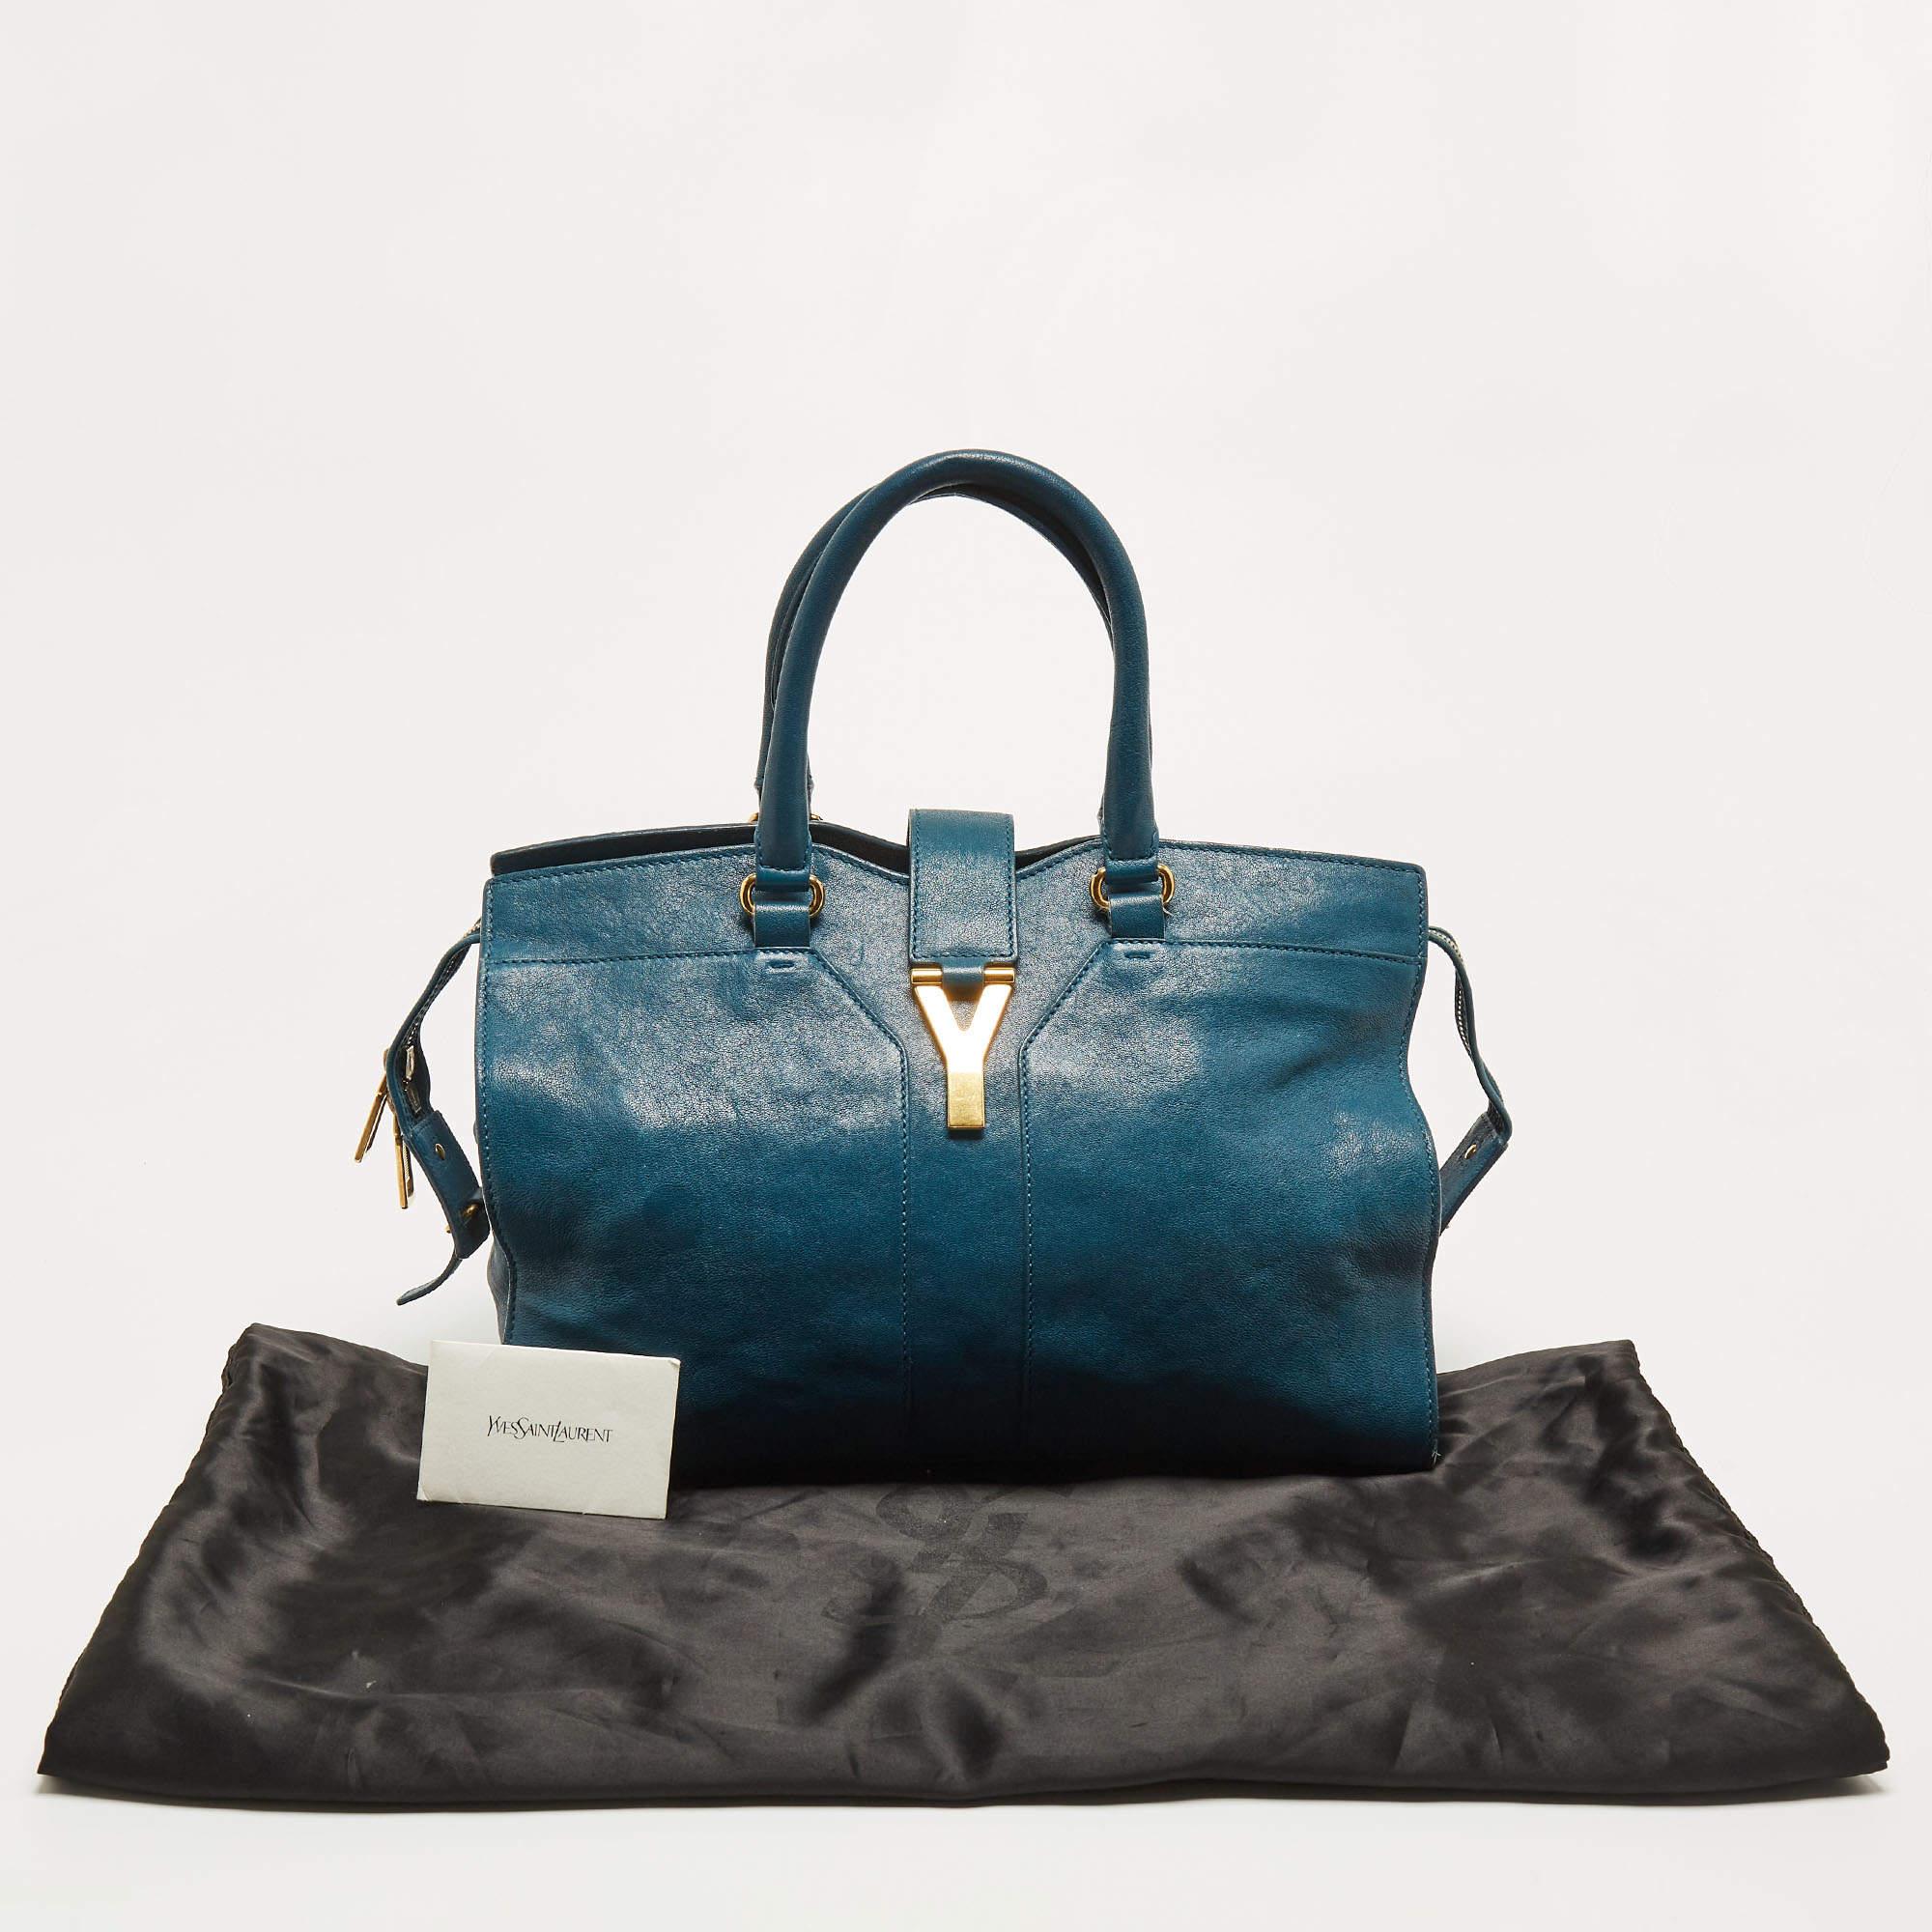 Yves Saint Laurent Teal Blue Leather Medium Cabas Chyc Tote 13